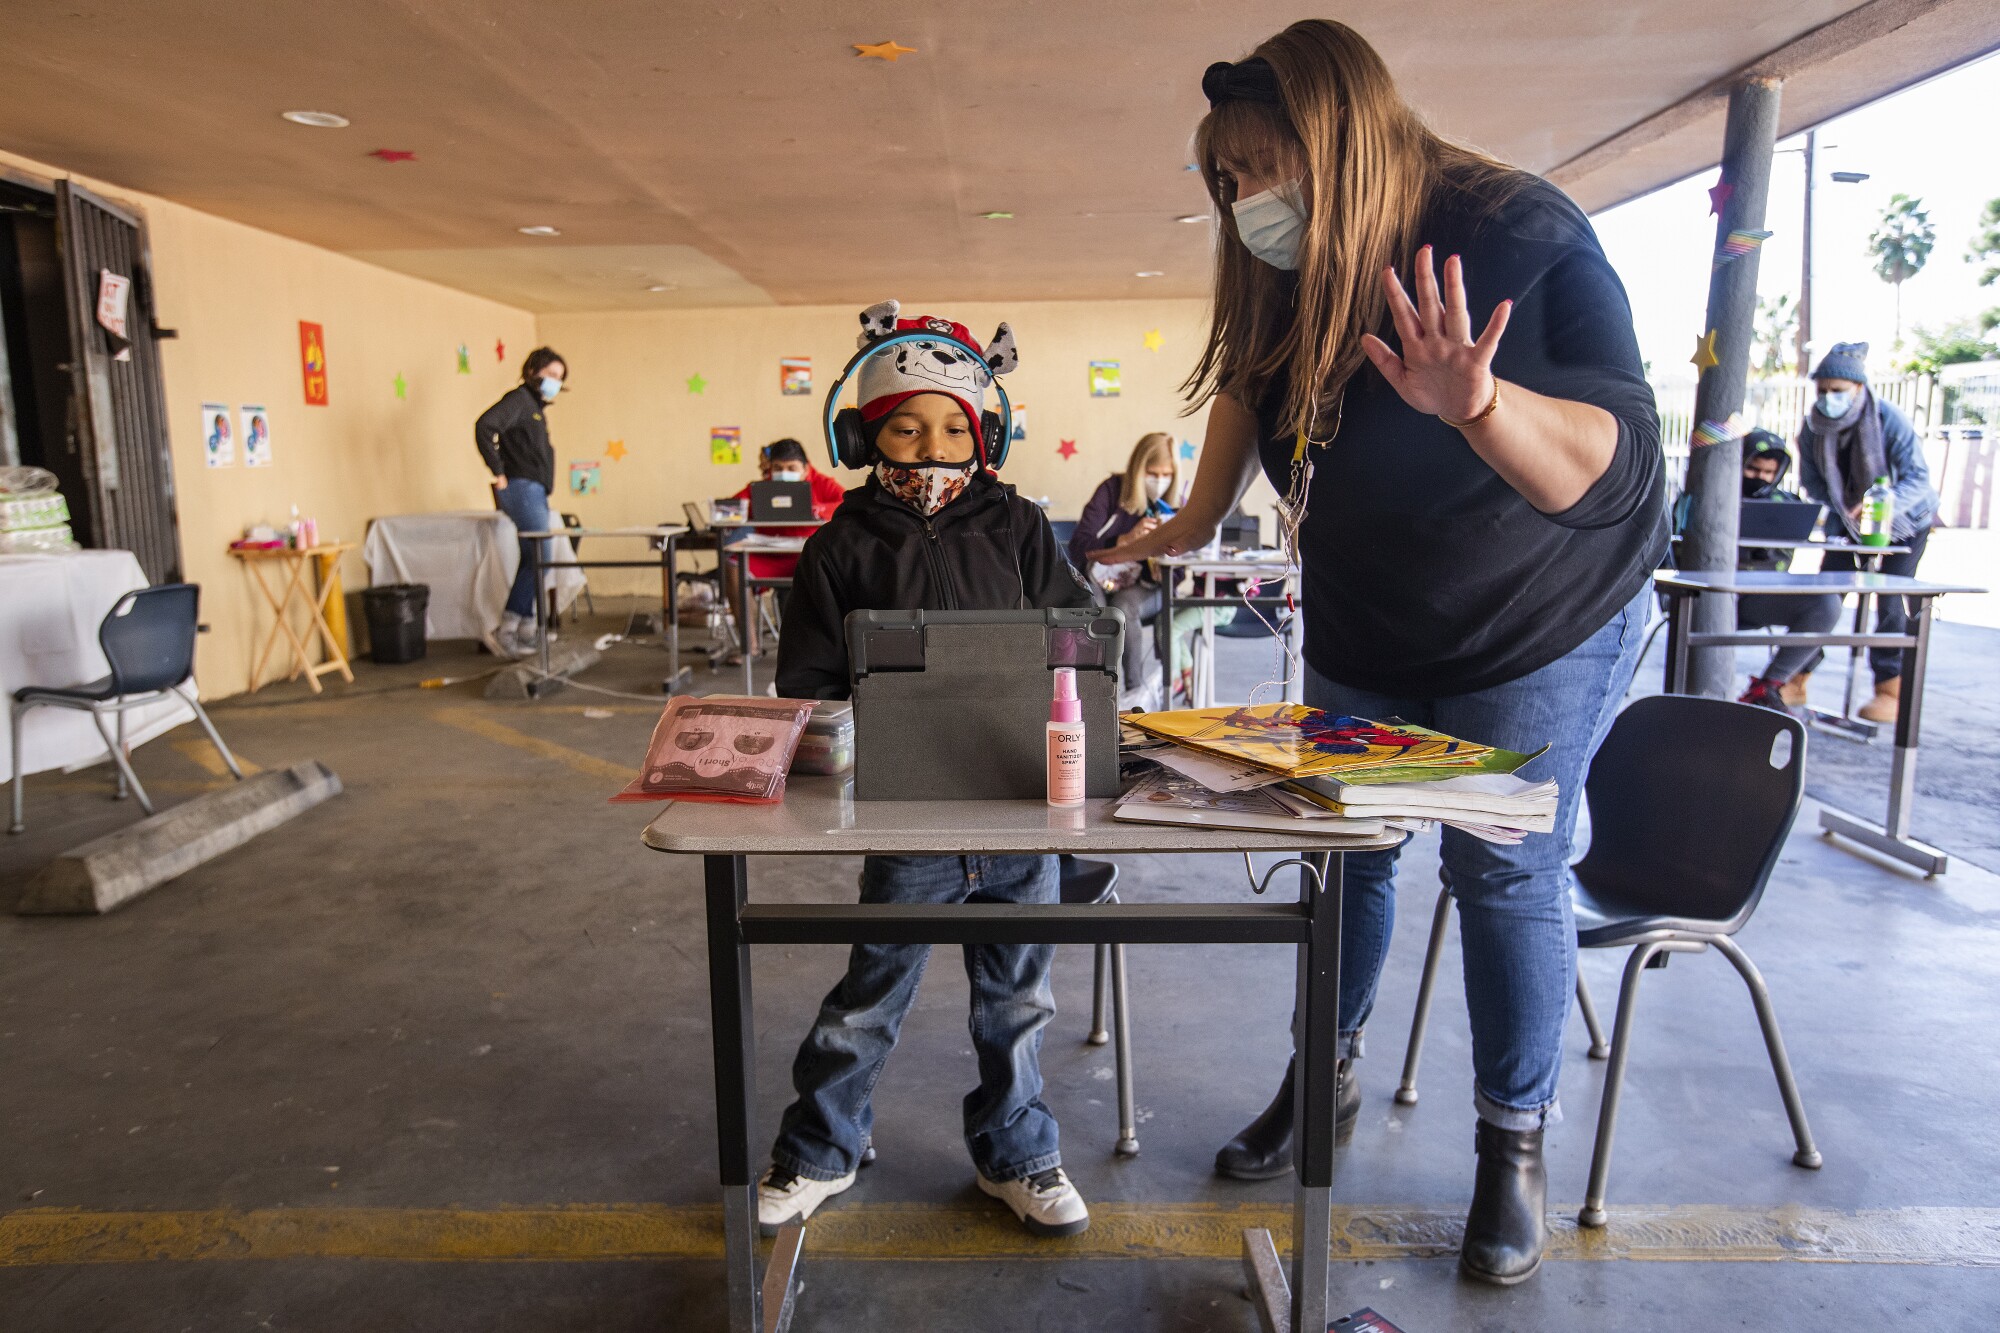 Volunteer Elyse Stelford helps a 6-year-old learn math at a learning pod for homeless children, at the Hyland Motel